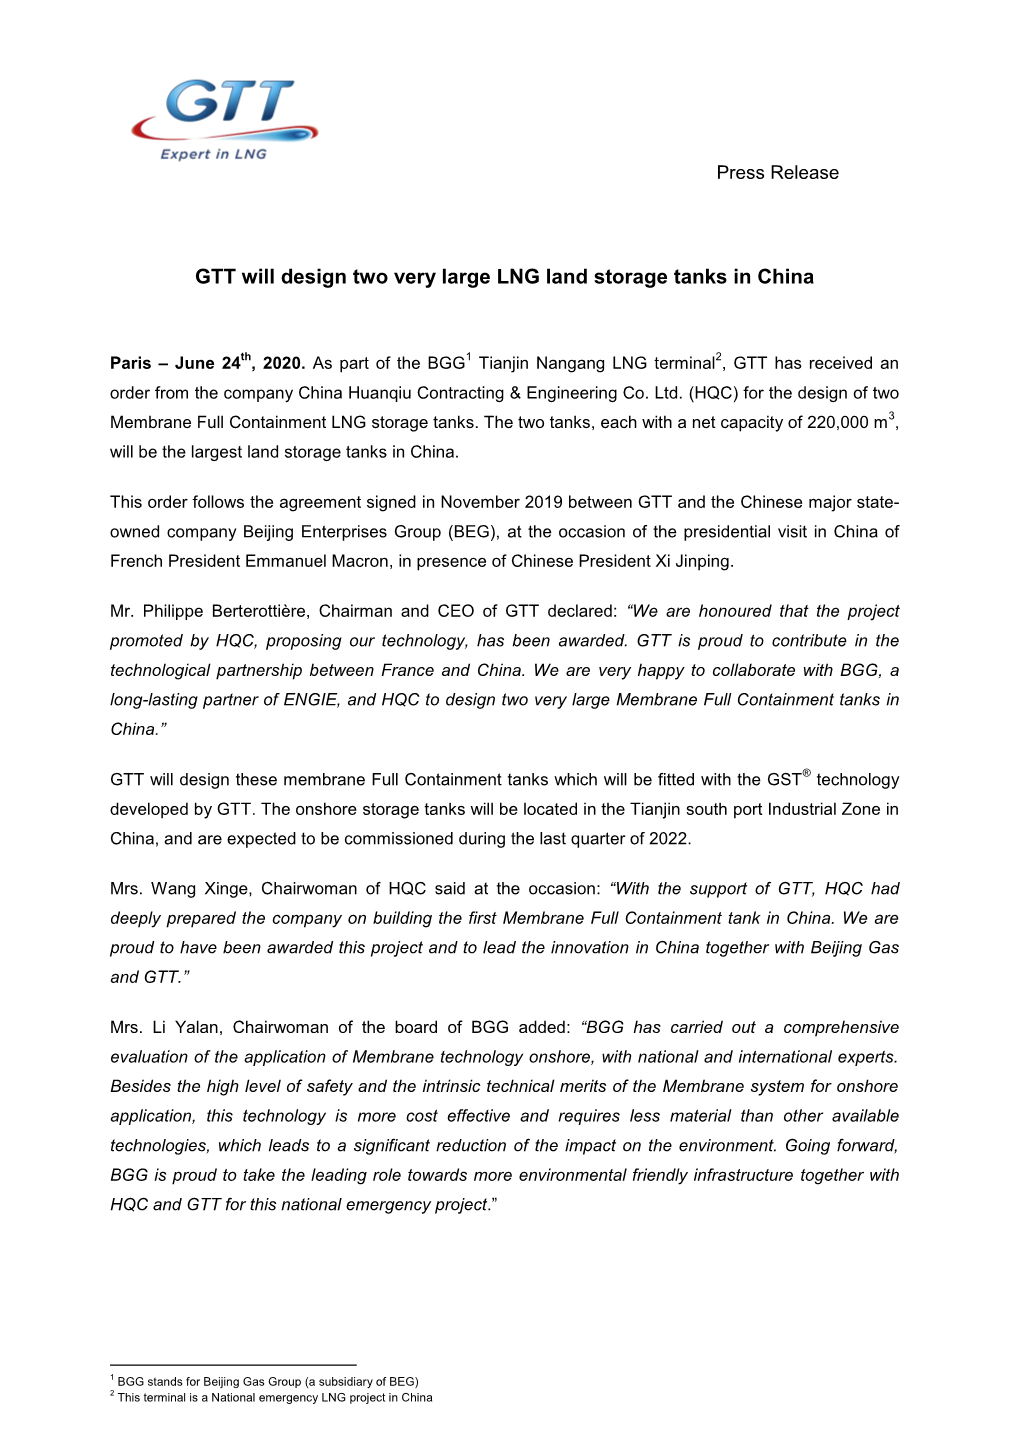 GTT Will Design Two Very Large LNG Land Storage Tanks in China